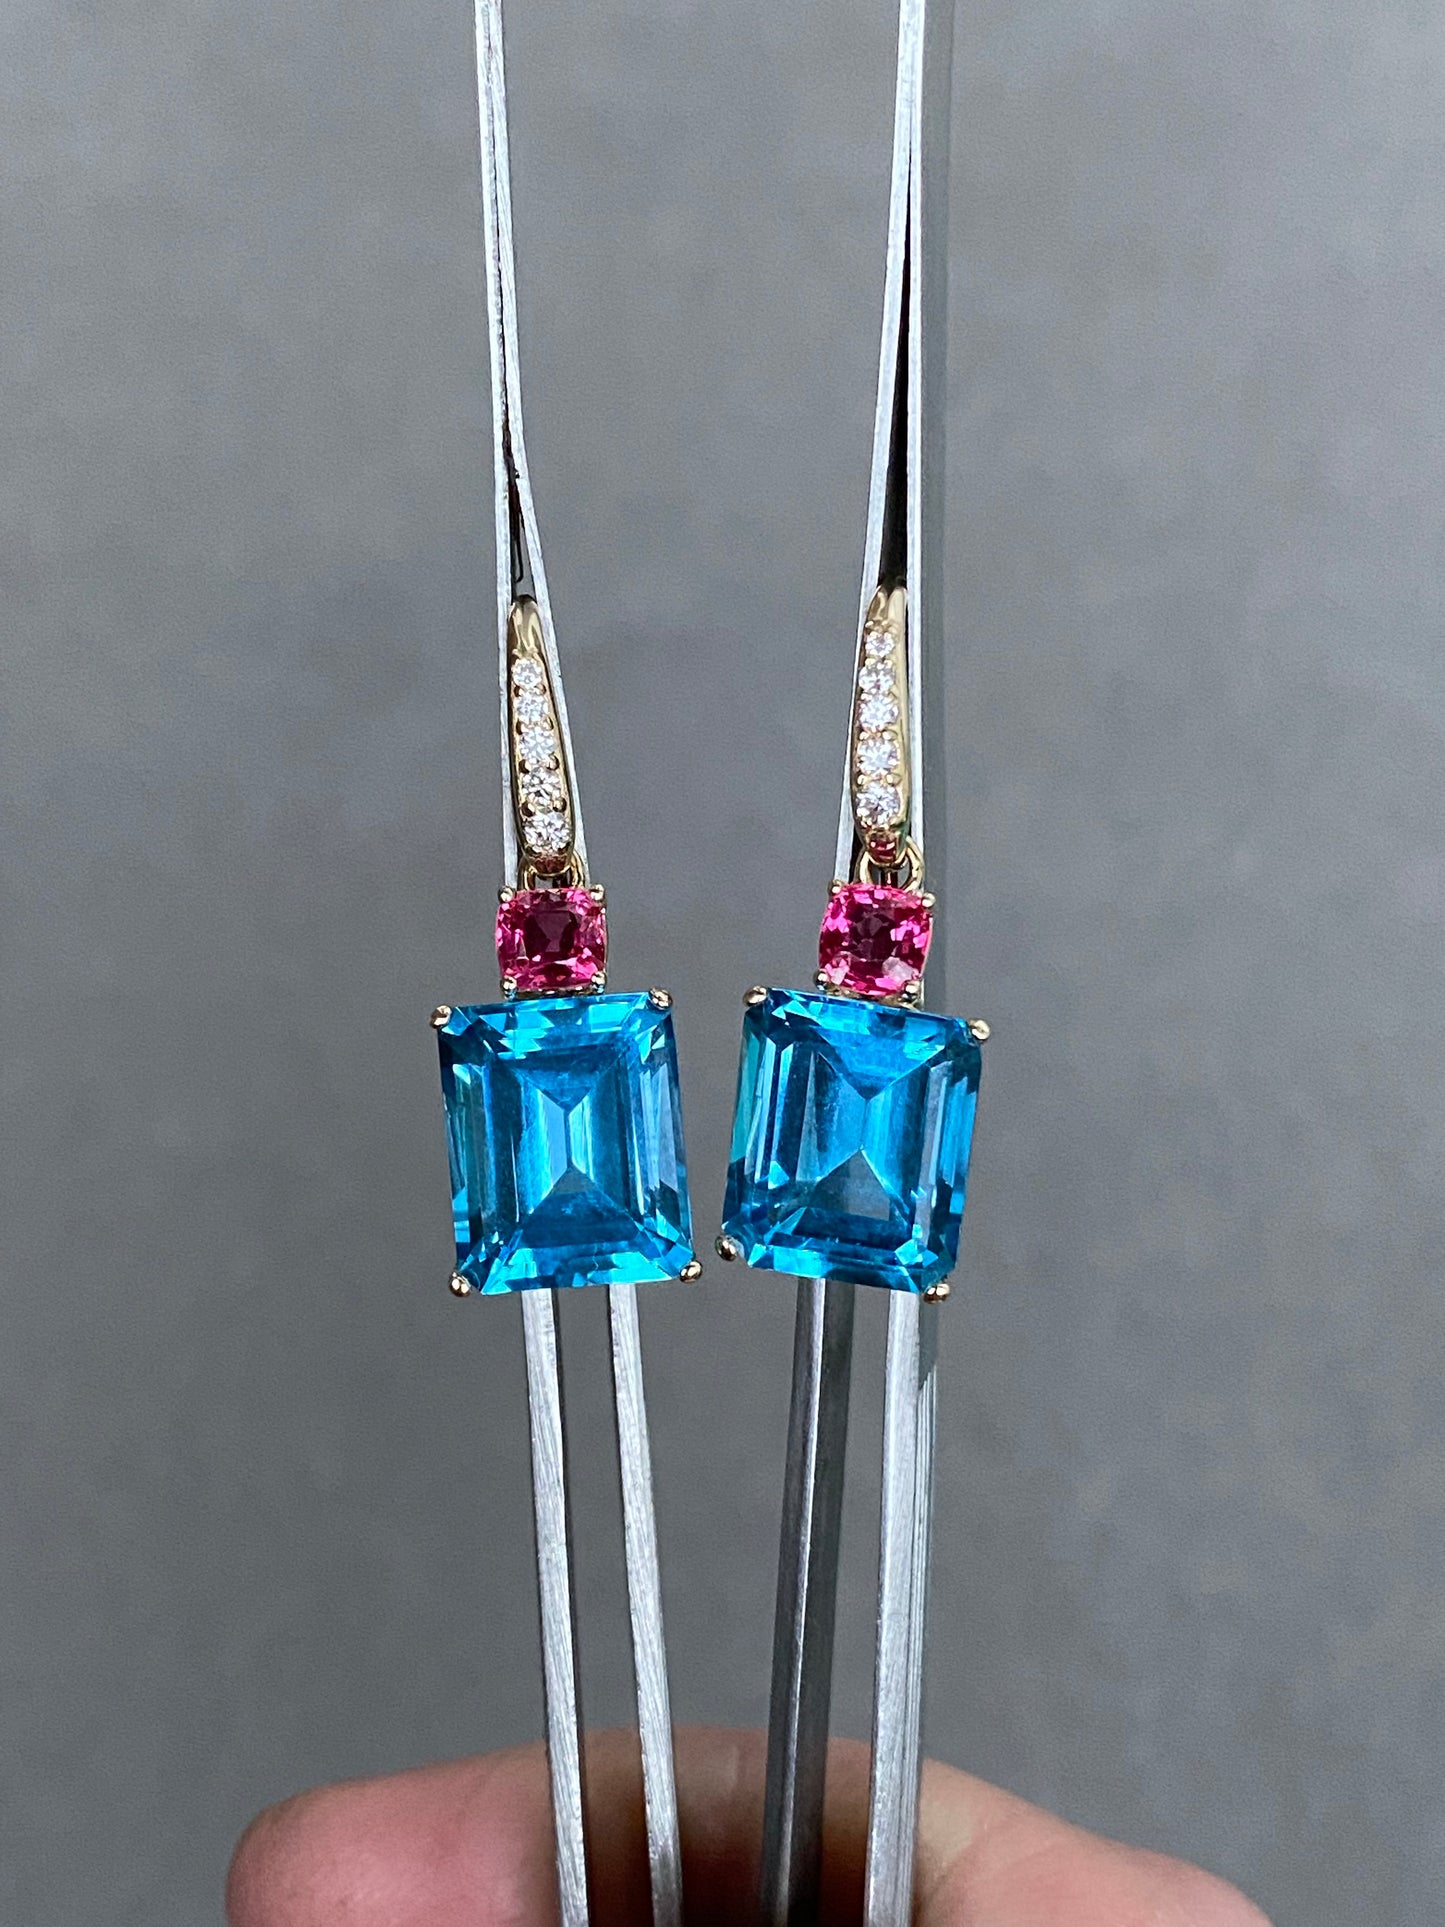 Earrings in yellowgold with pink spinel and blue topaz